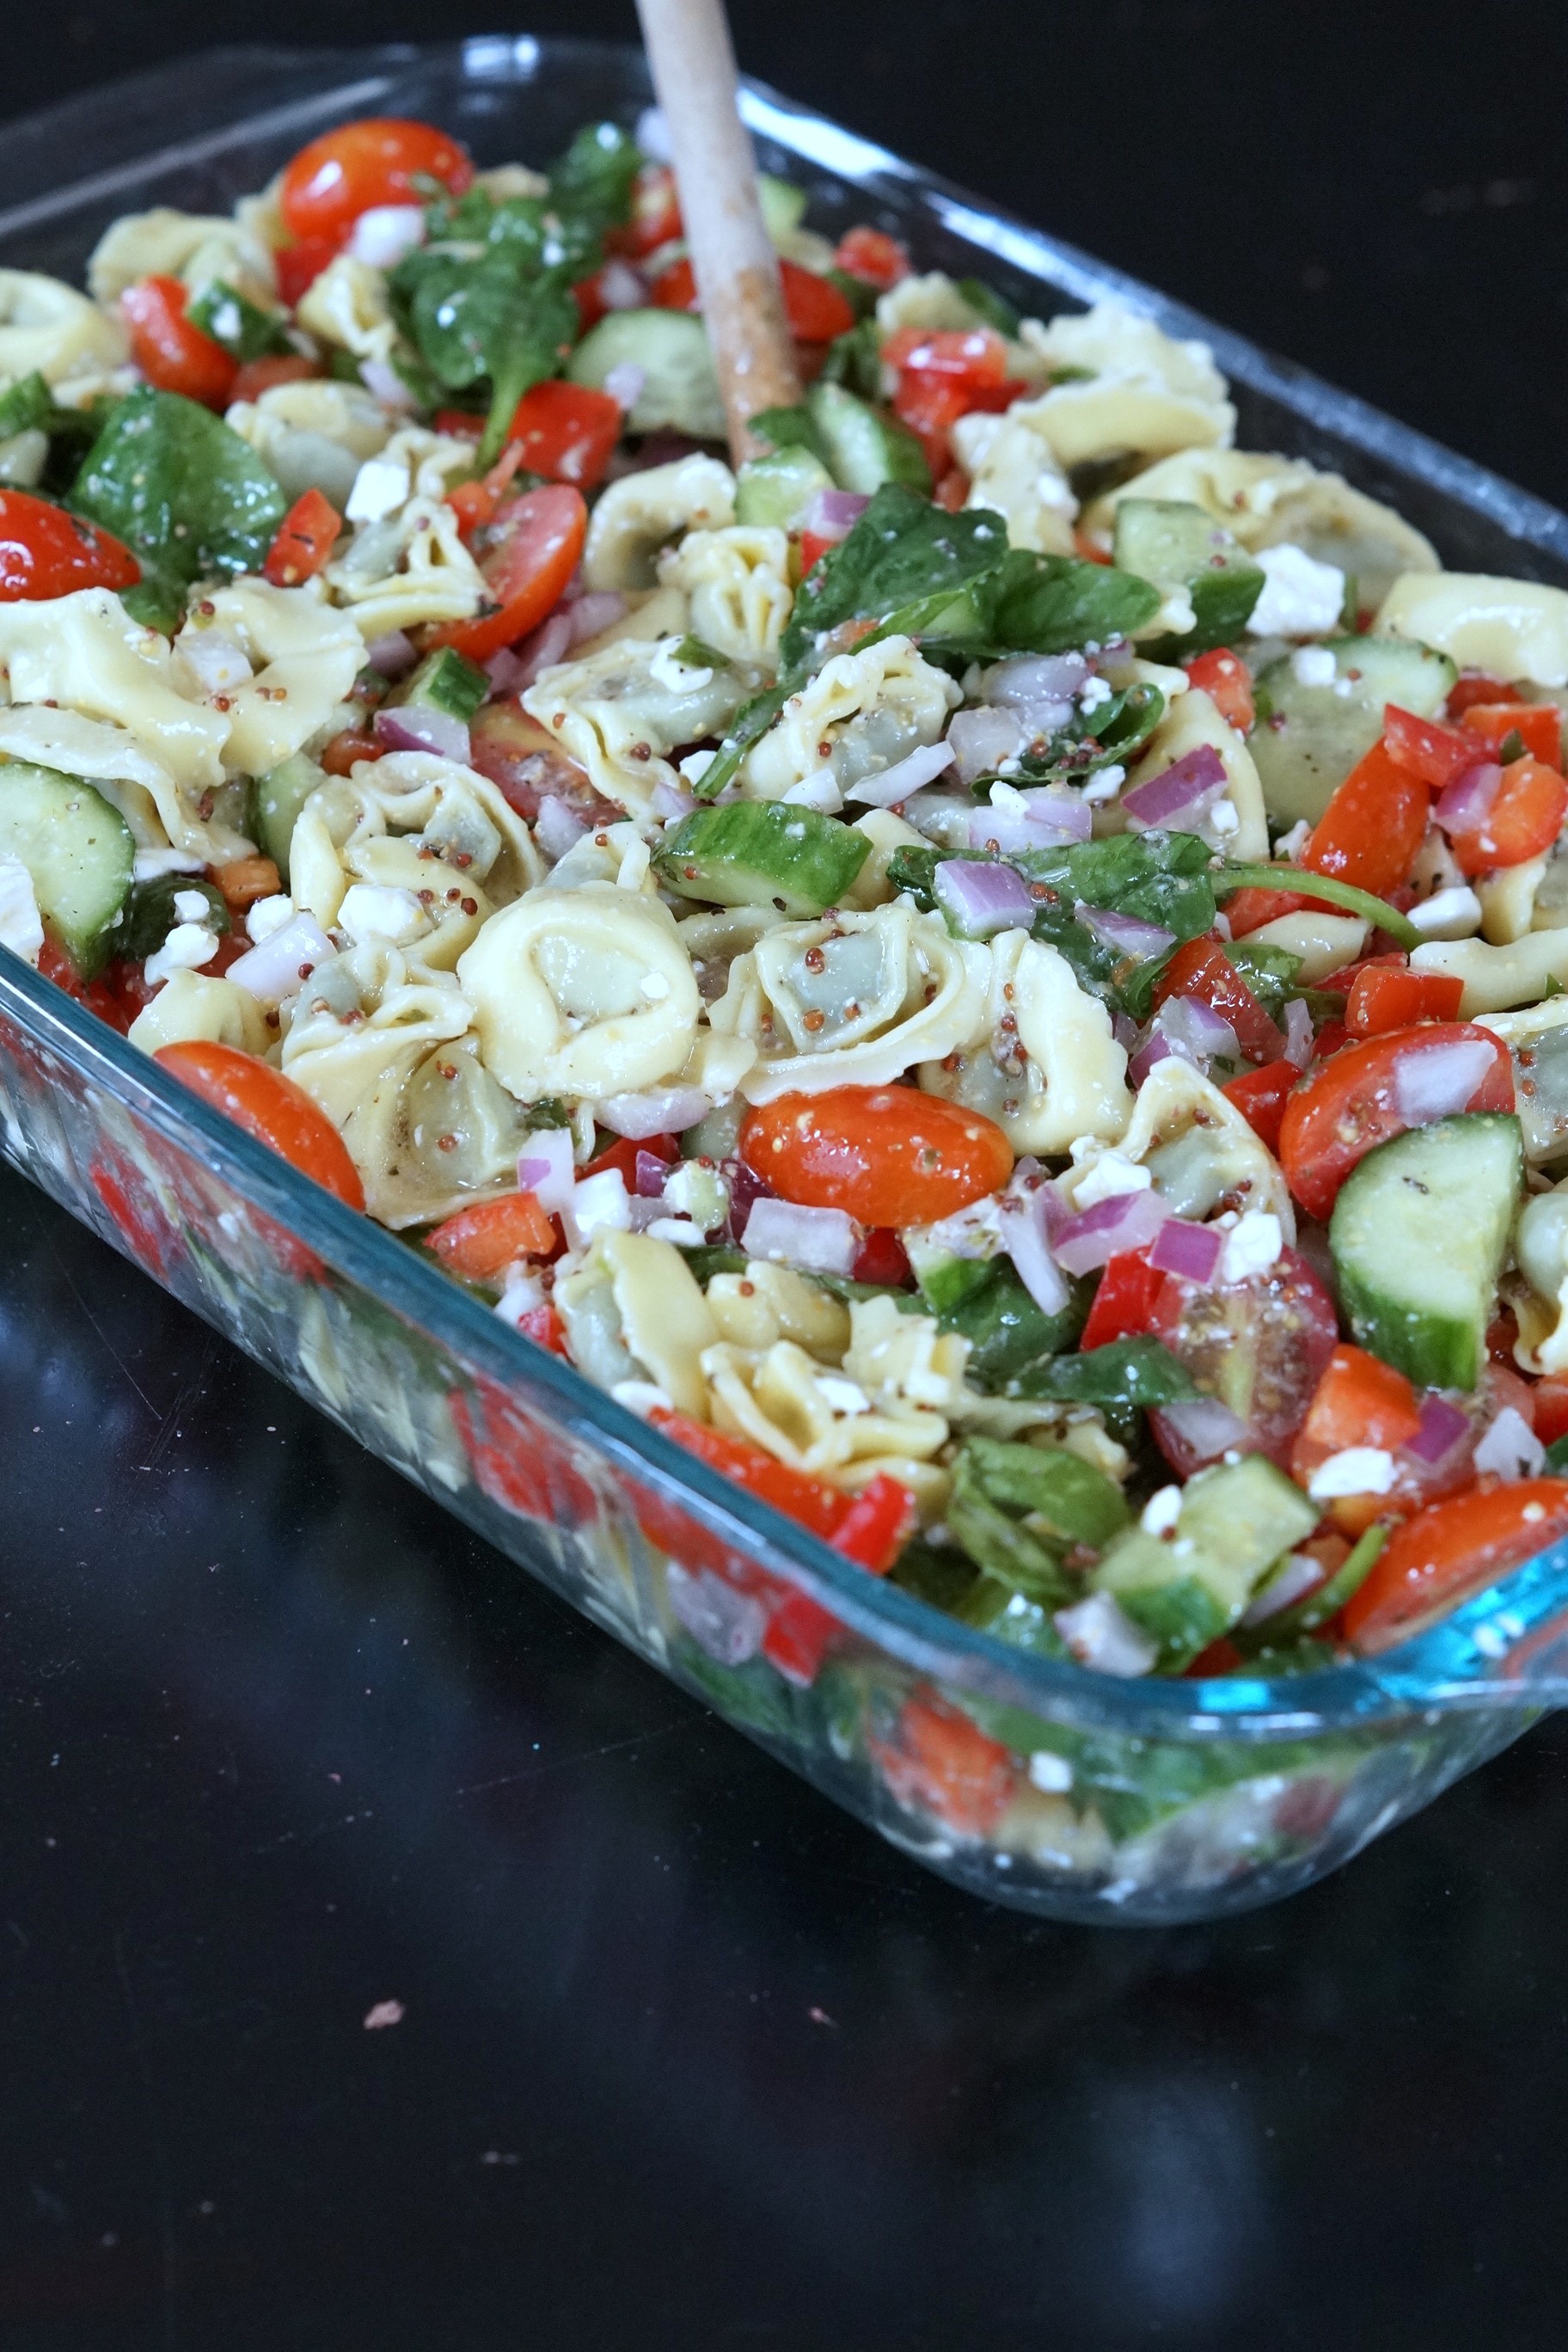 Looking for the perfect dish for a pot luck that doesn't require a lot of time in the kitchen? Bring this crowd-pleasing tortellini pasta salad.